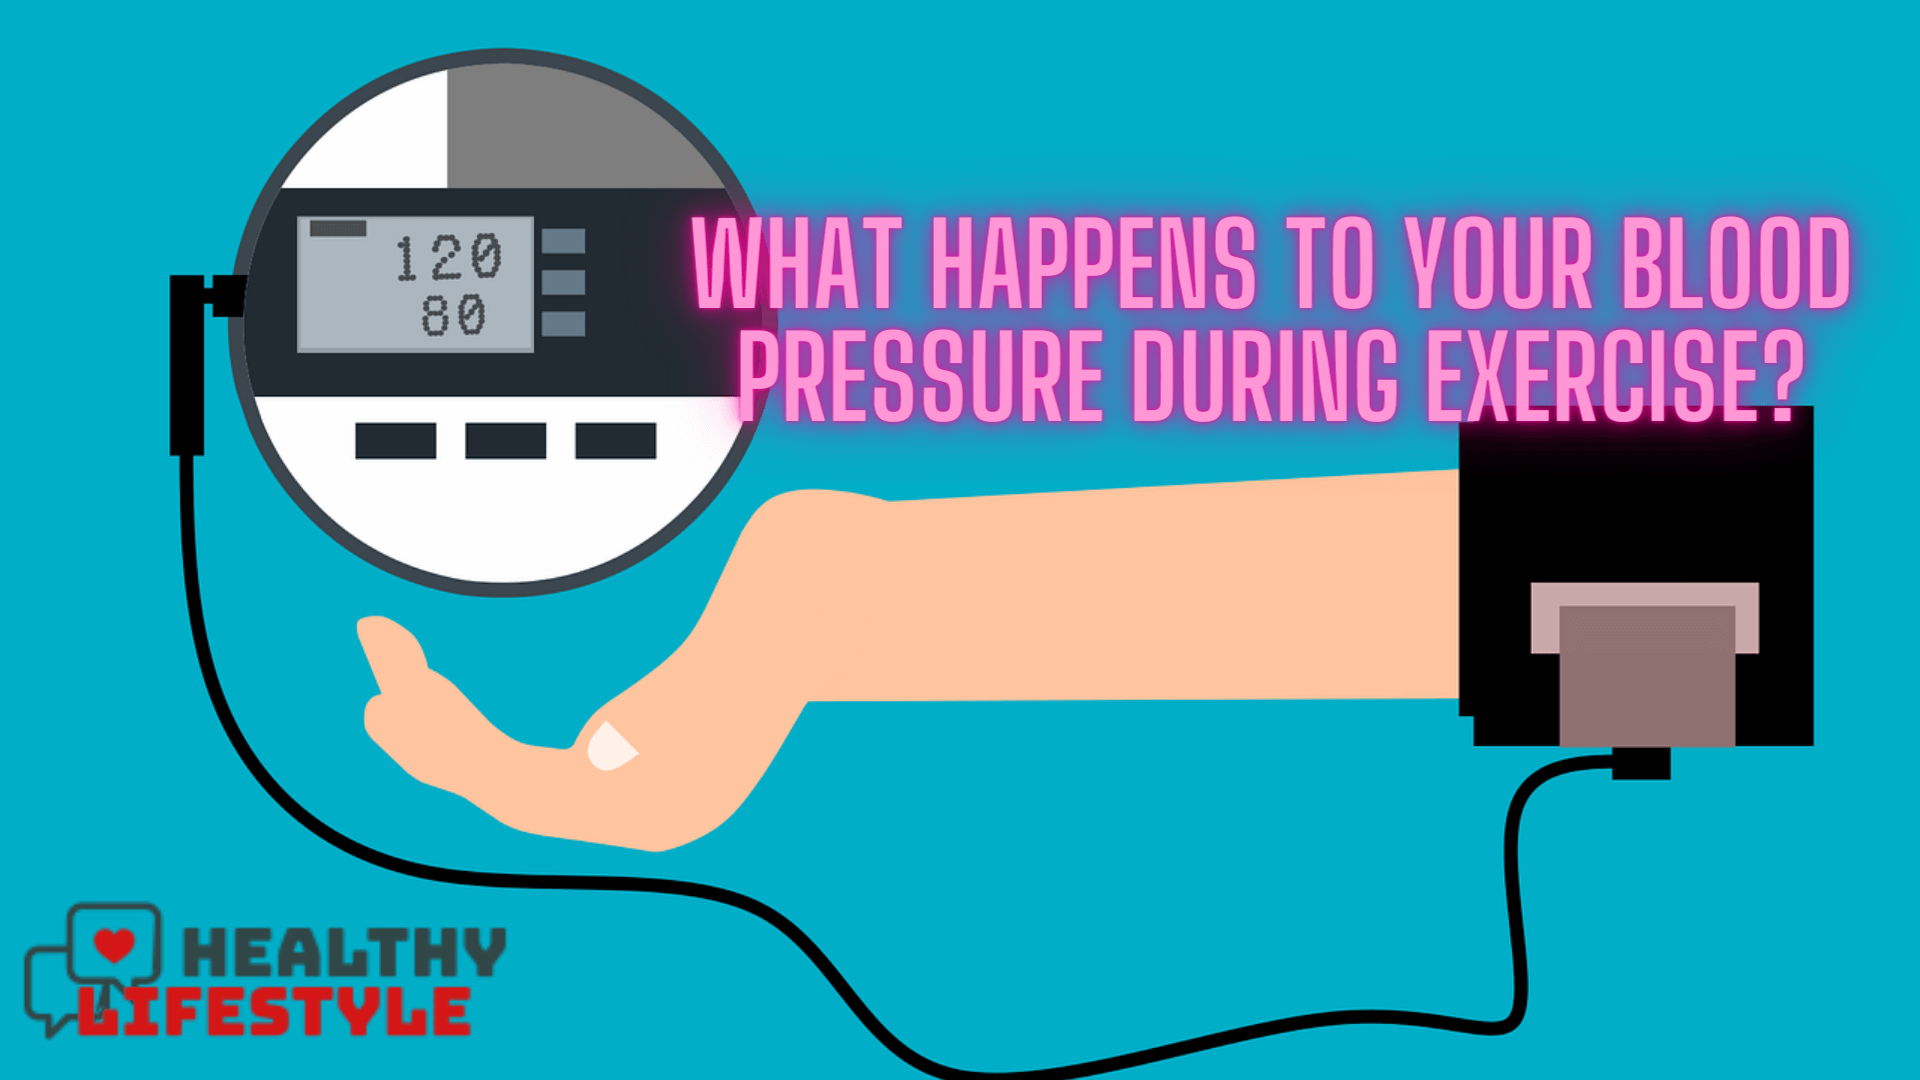 What Happens to your blood pressure during exercise?